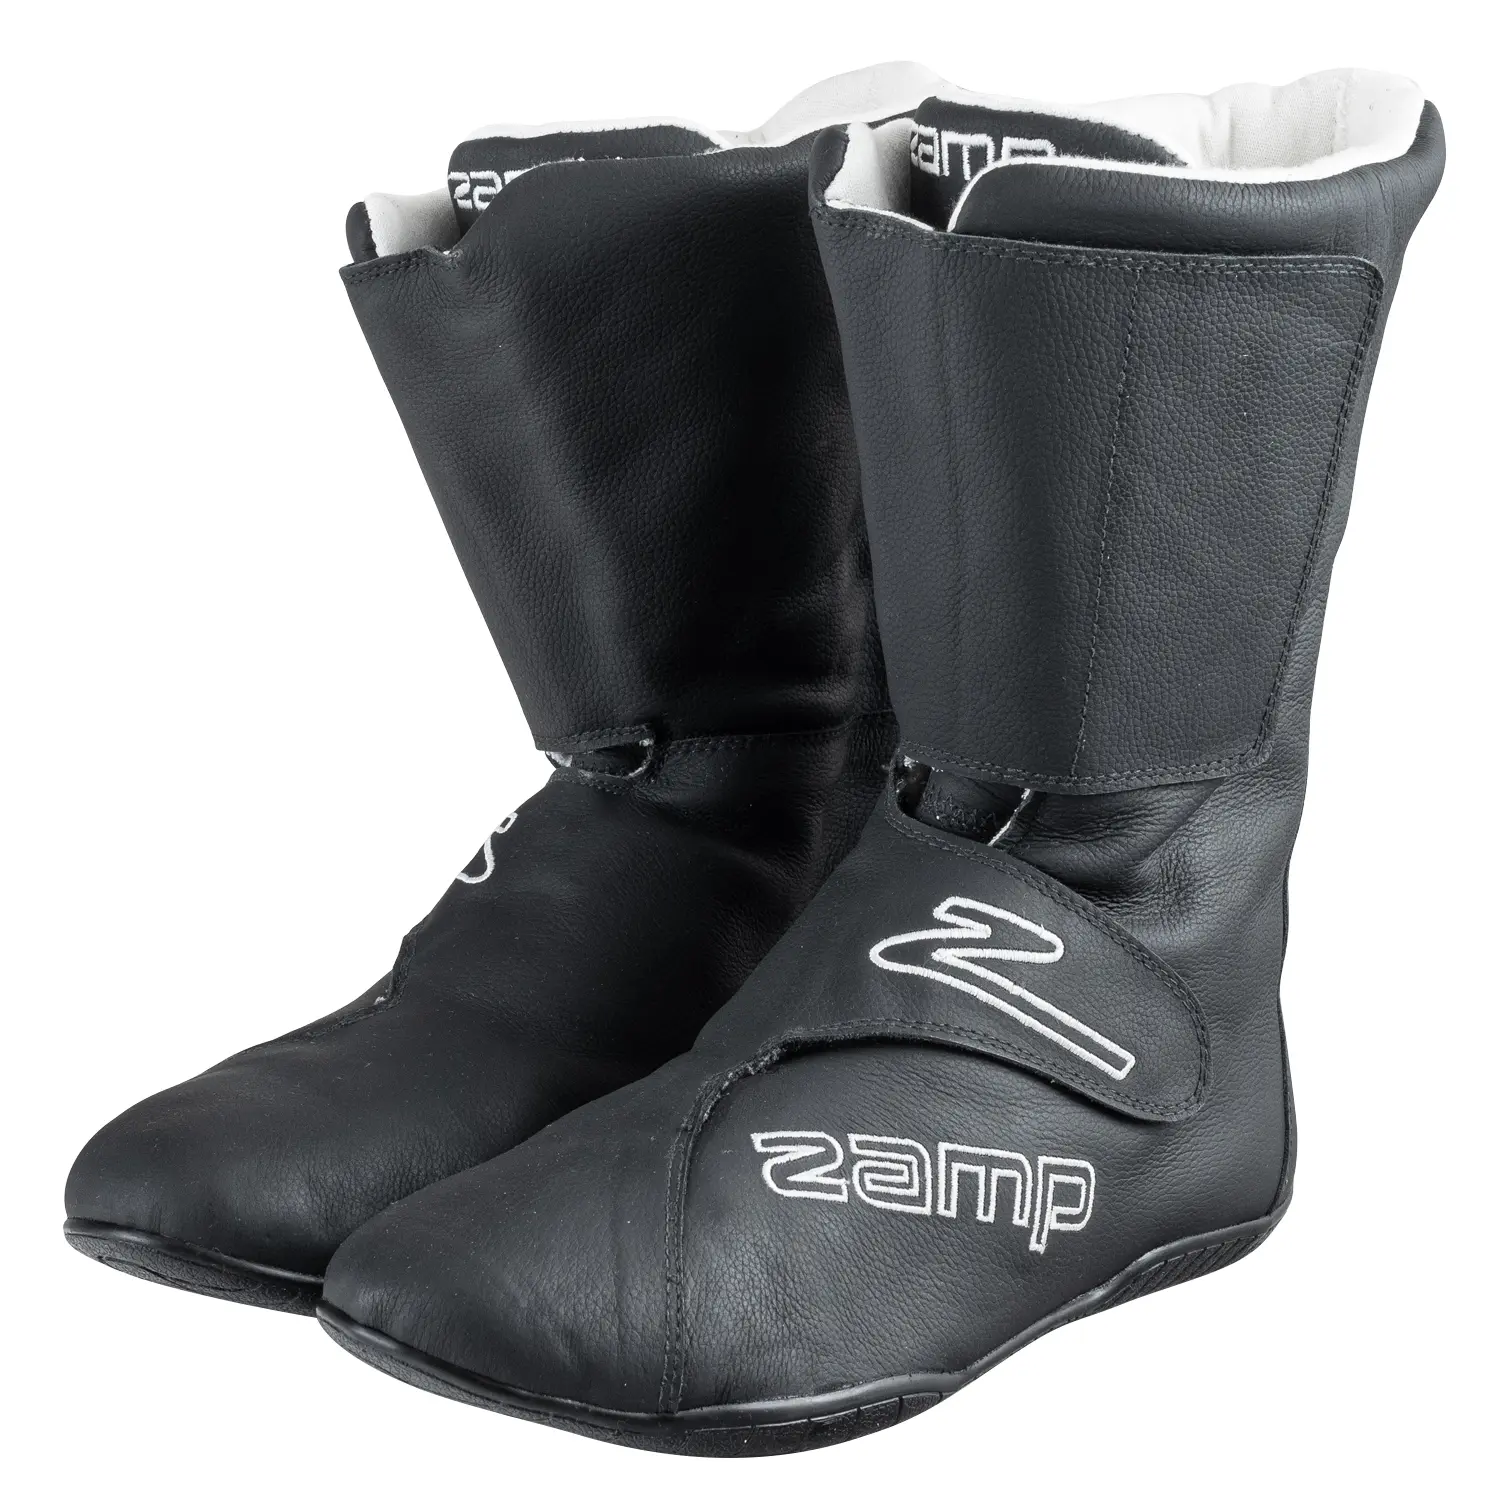 ZR-Drag Boots